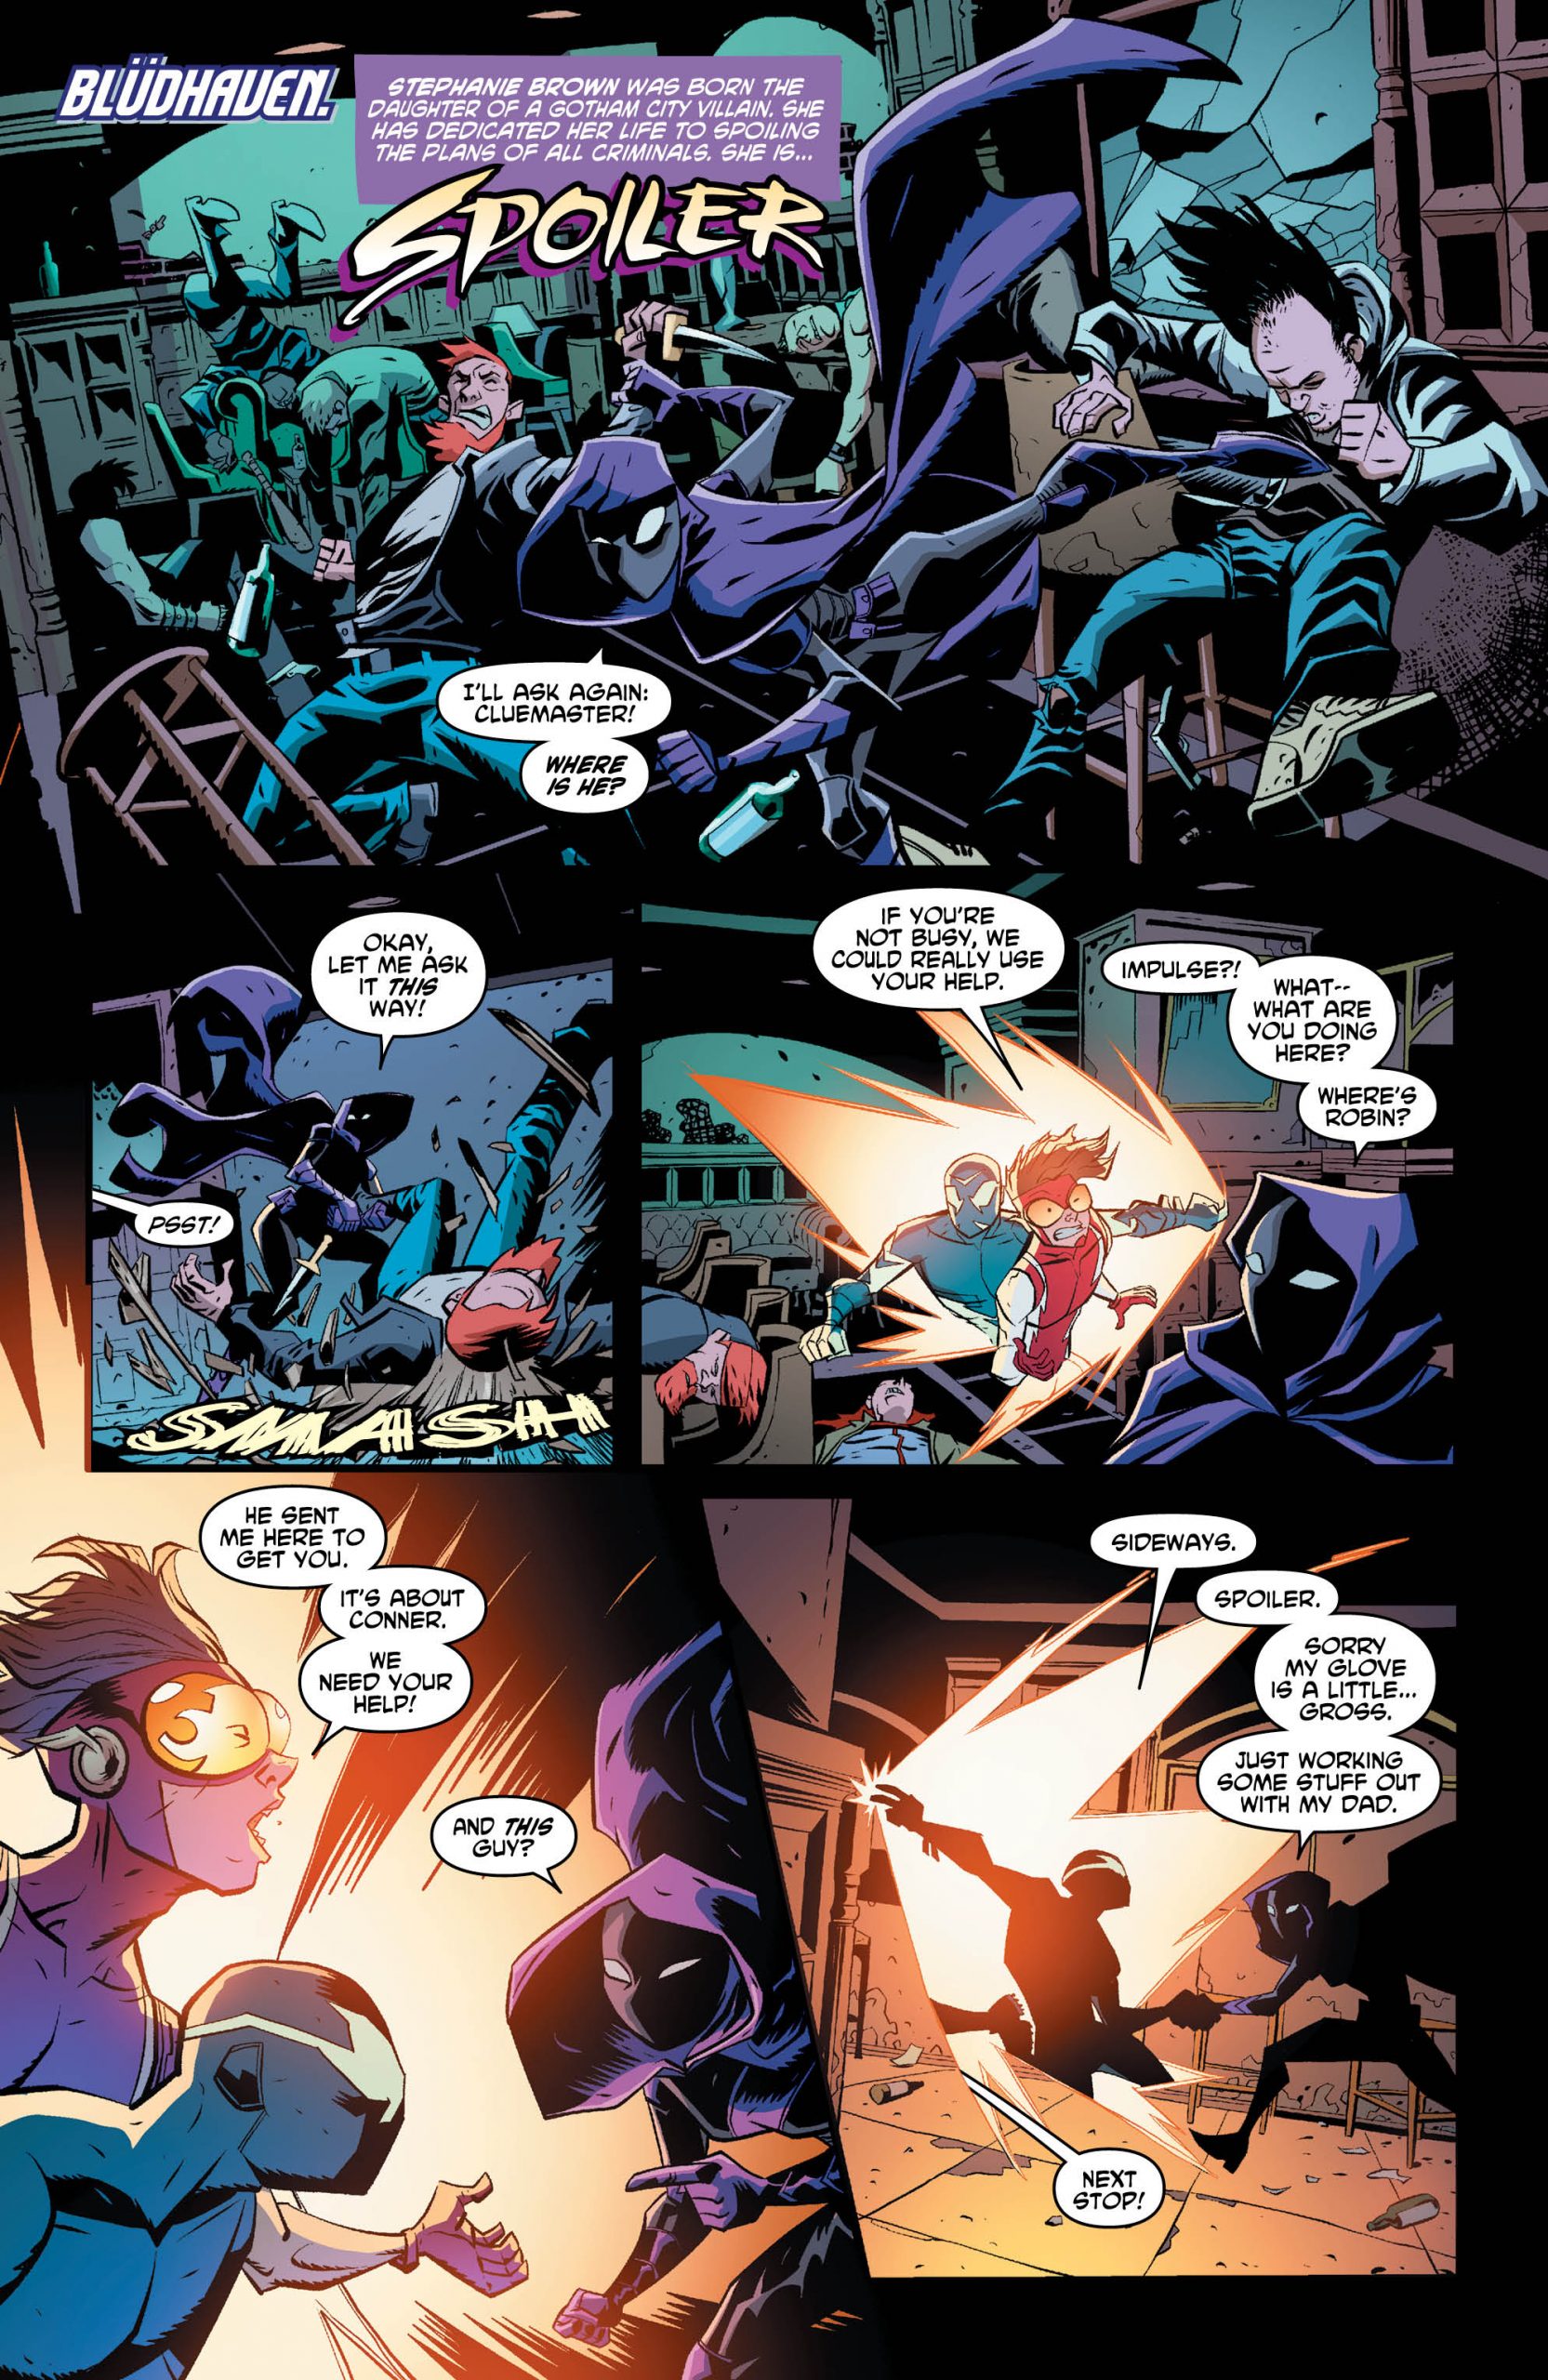 Young Justice #14